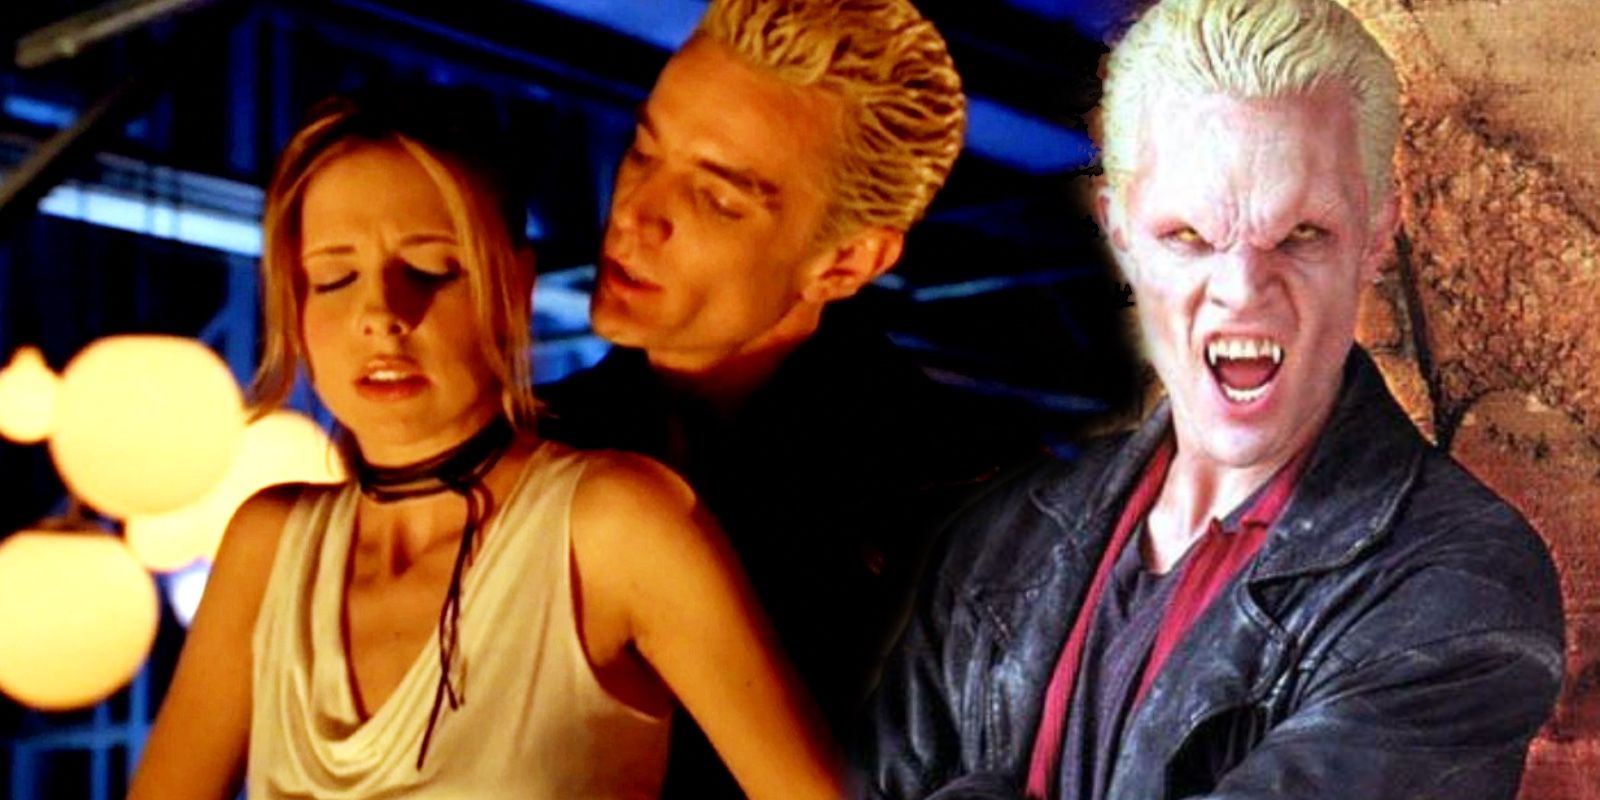 Buffy relationship and spike Buffy Love,